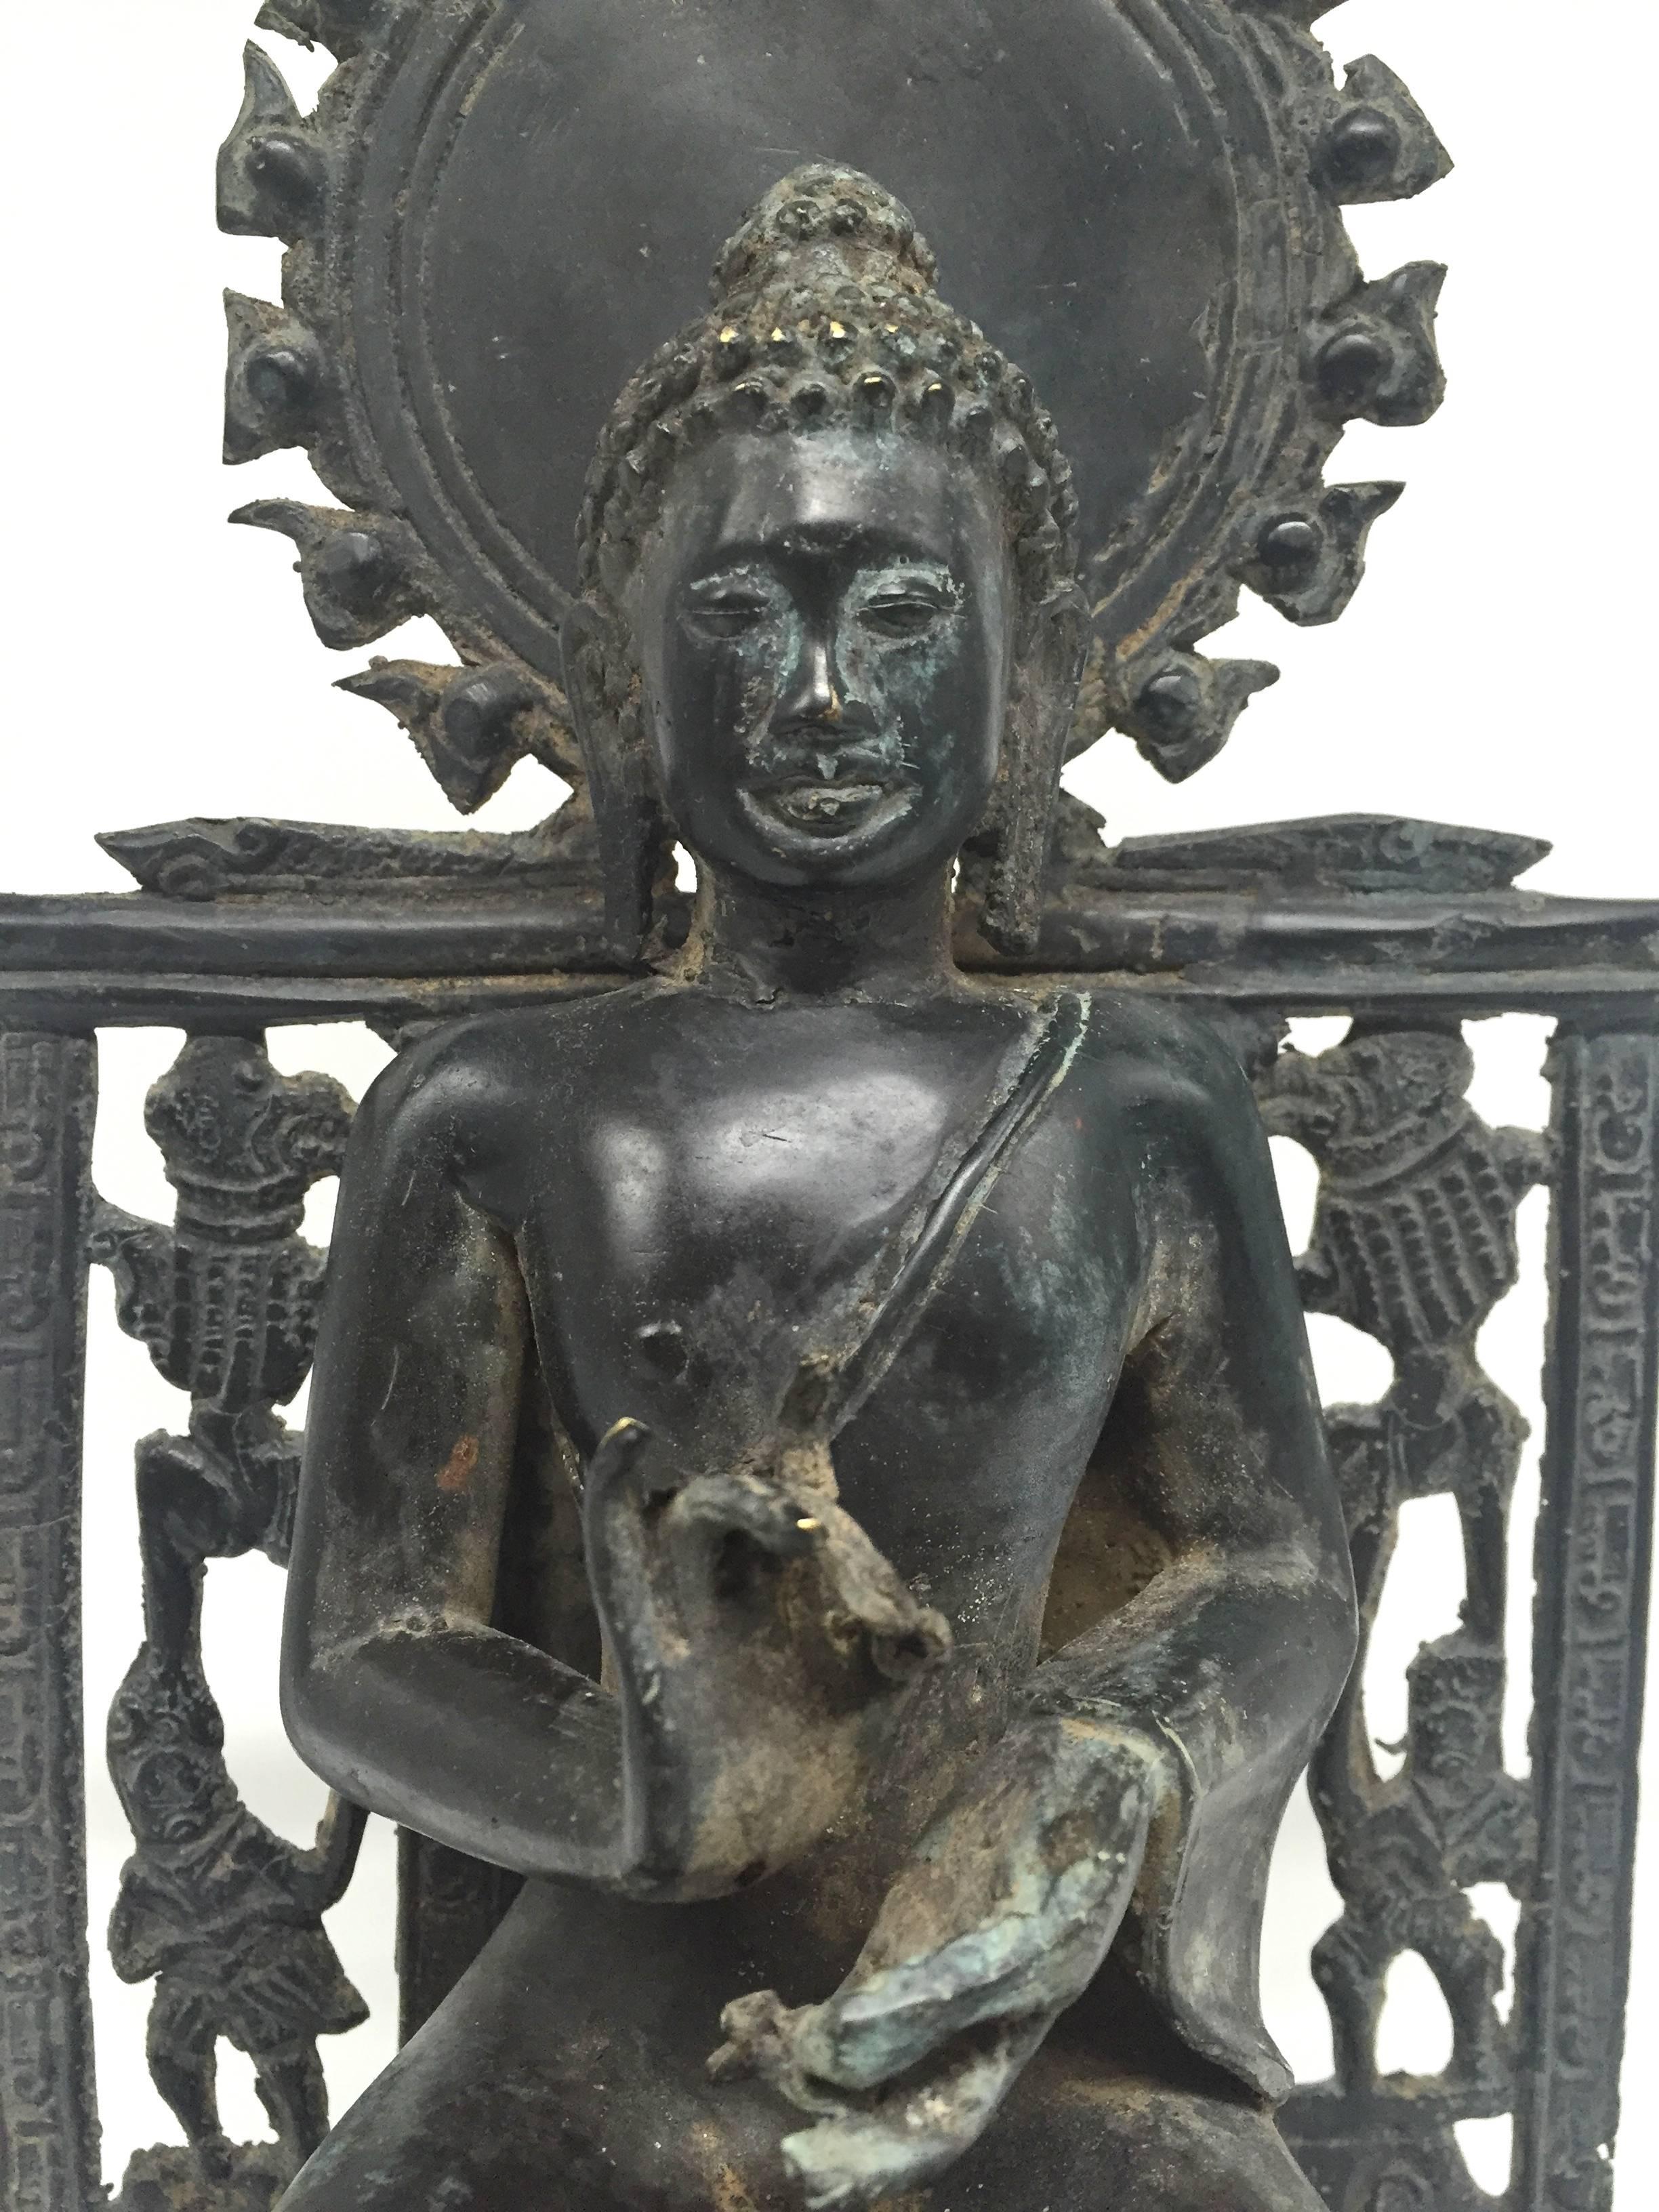 An exquisite late 20th century Burmese bronze Buddha.

The Buddha is seated on a throne with two lions anchoring the base. His back features beasts and warriors with a halo above and behind. His ankles are together with a decorated sash draping down